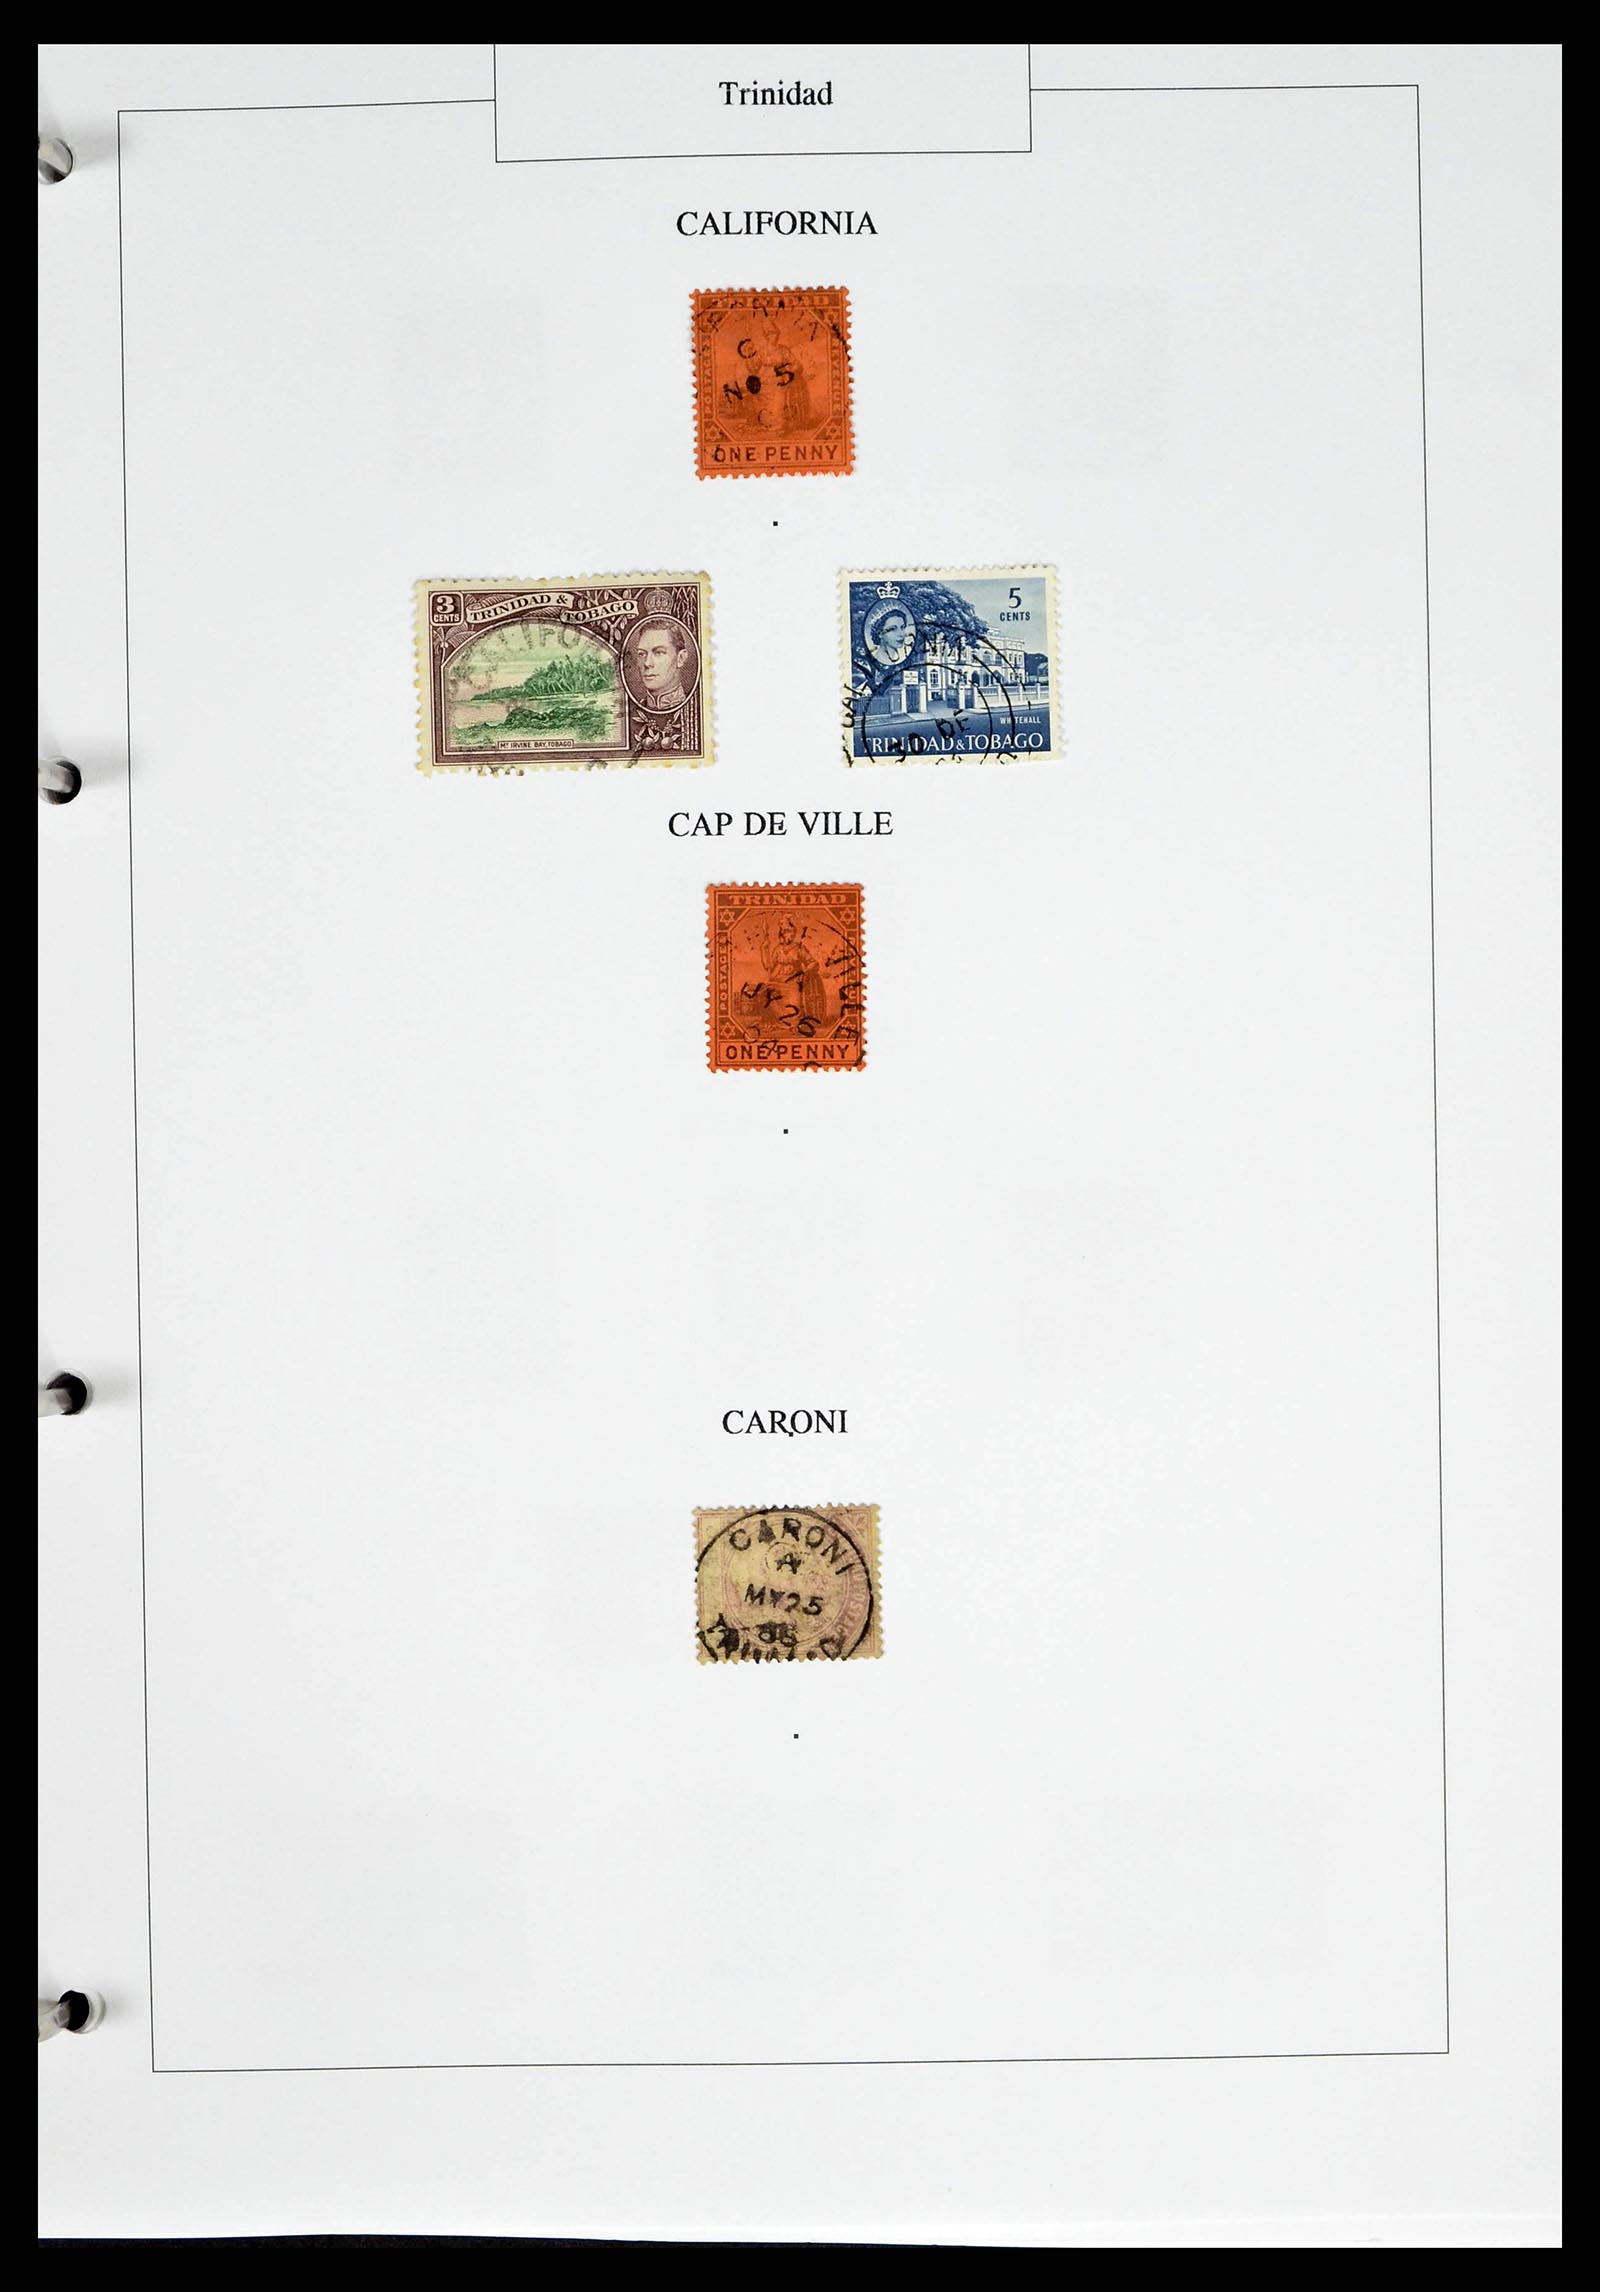 38481 0018 - Stamp collection 38481 Trinidad and Tobago cancels 1859-1960.